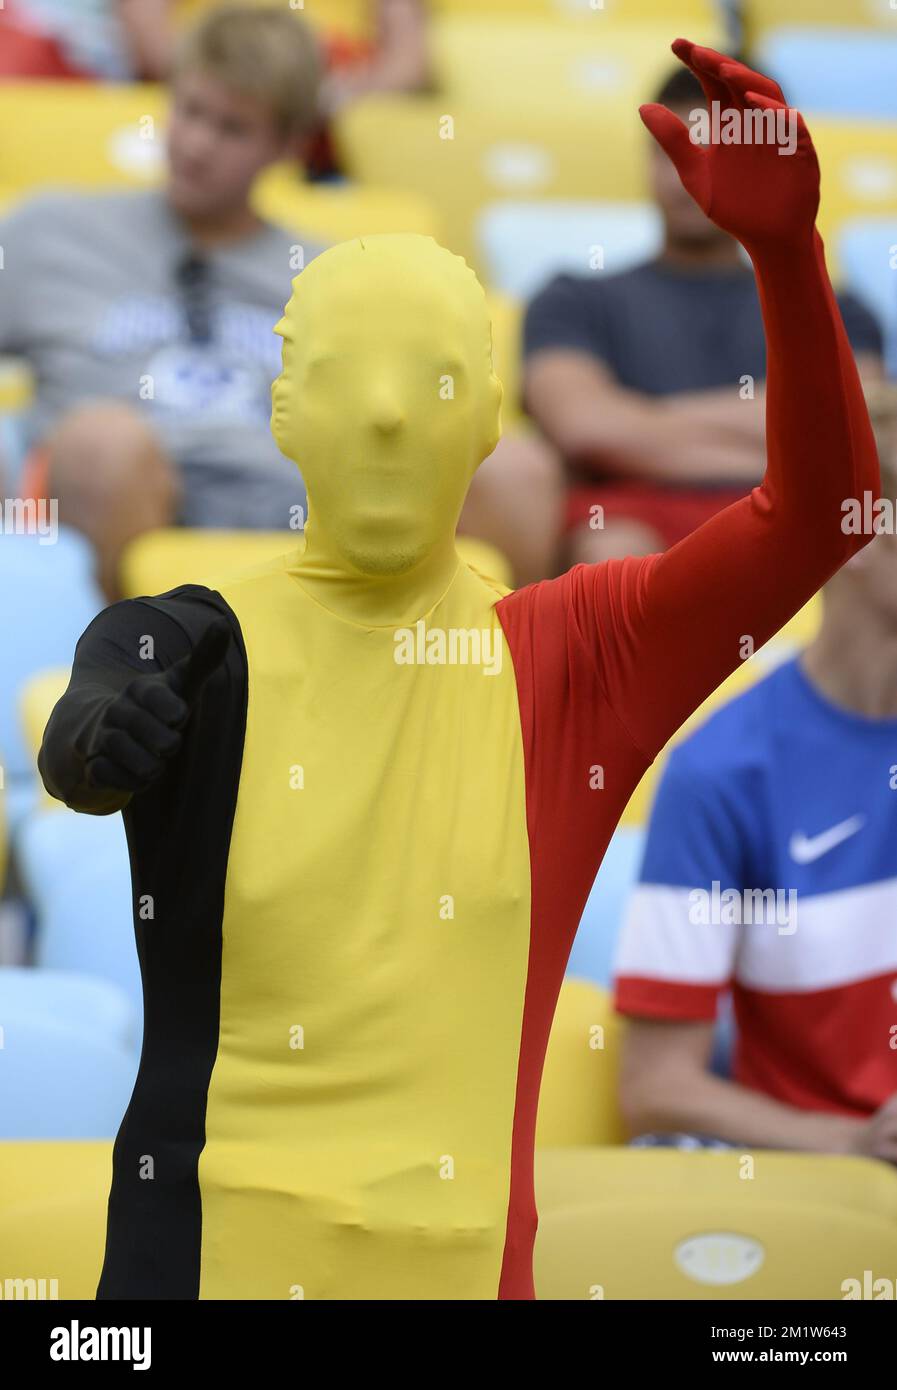 20140622 - RIO DE JANEIRO, BRAZIL: Belgian fan dressed as a Belgian flag pictured ahead of a soccer game between Belgian national team The Red Devils and Russia in Rio de Janeiro, Brazil, the second game in Group H of the first round of the 2014 FIFA World Cup, Sunday 22 June 2014. BELGA PHOTO DIRK WAEM Stock Photo